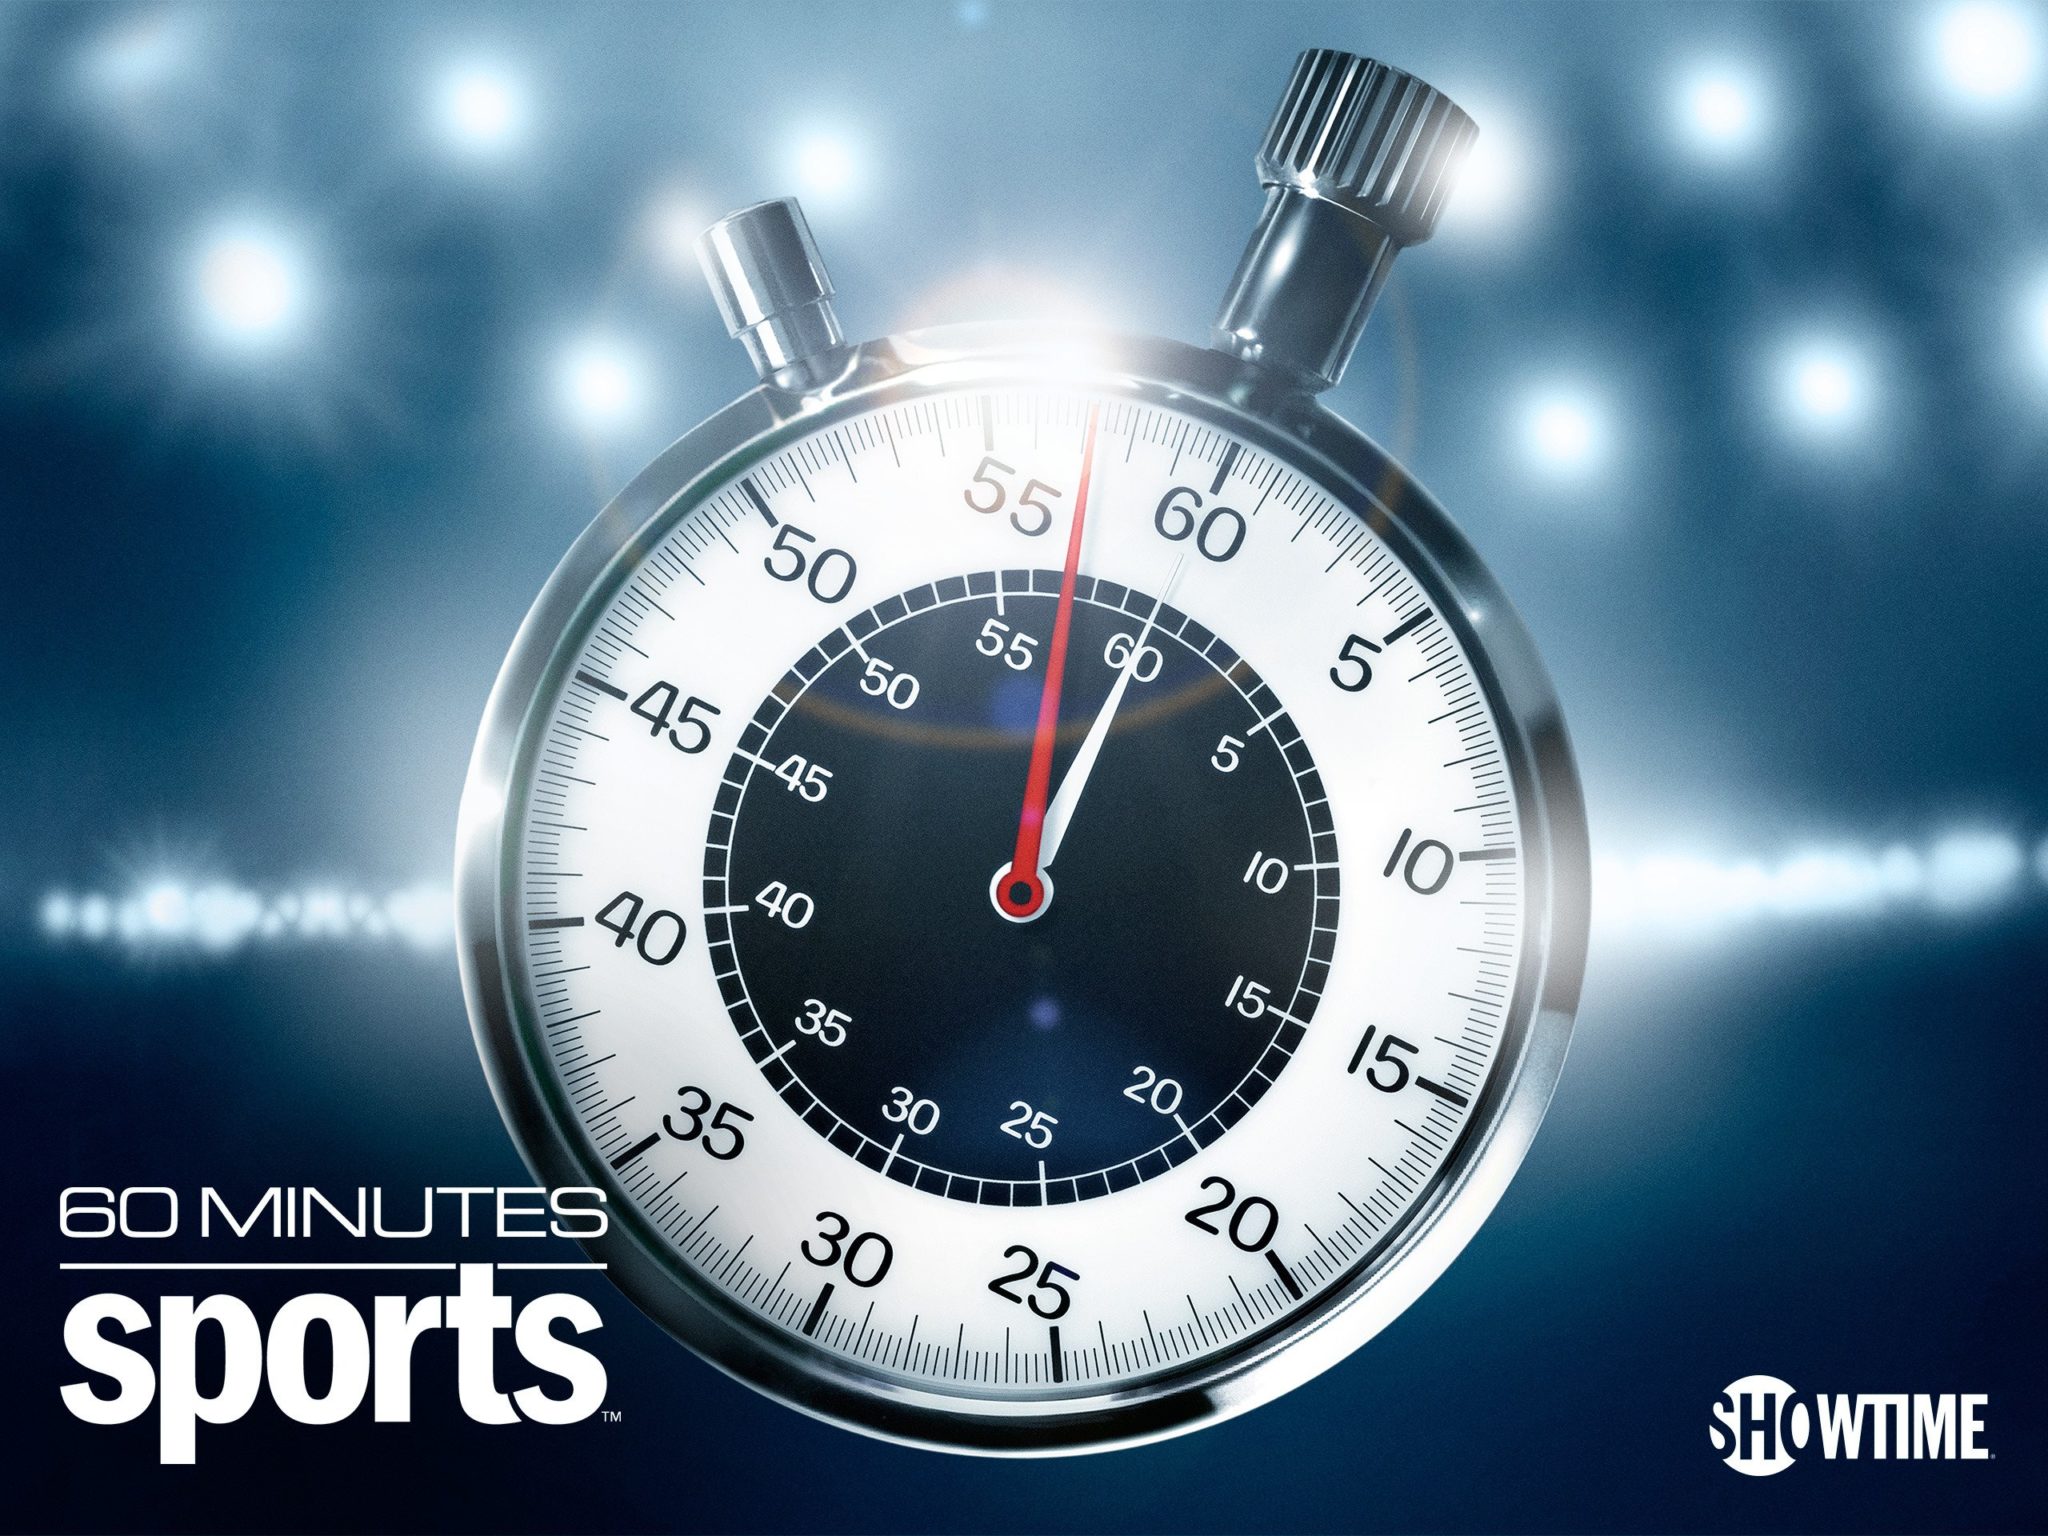 60 Minutes CBS News Series to Air New Episodes at Least Through June